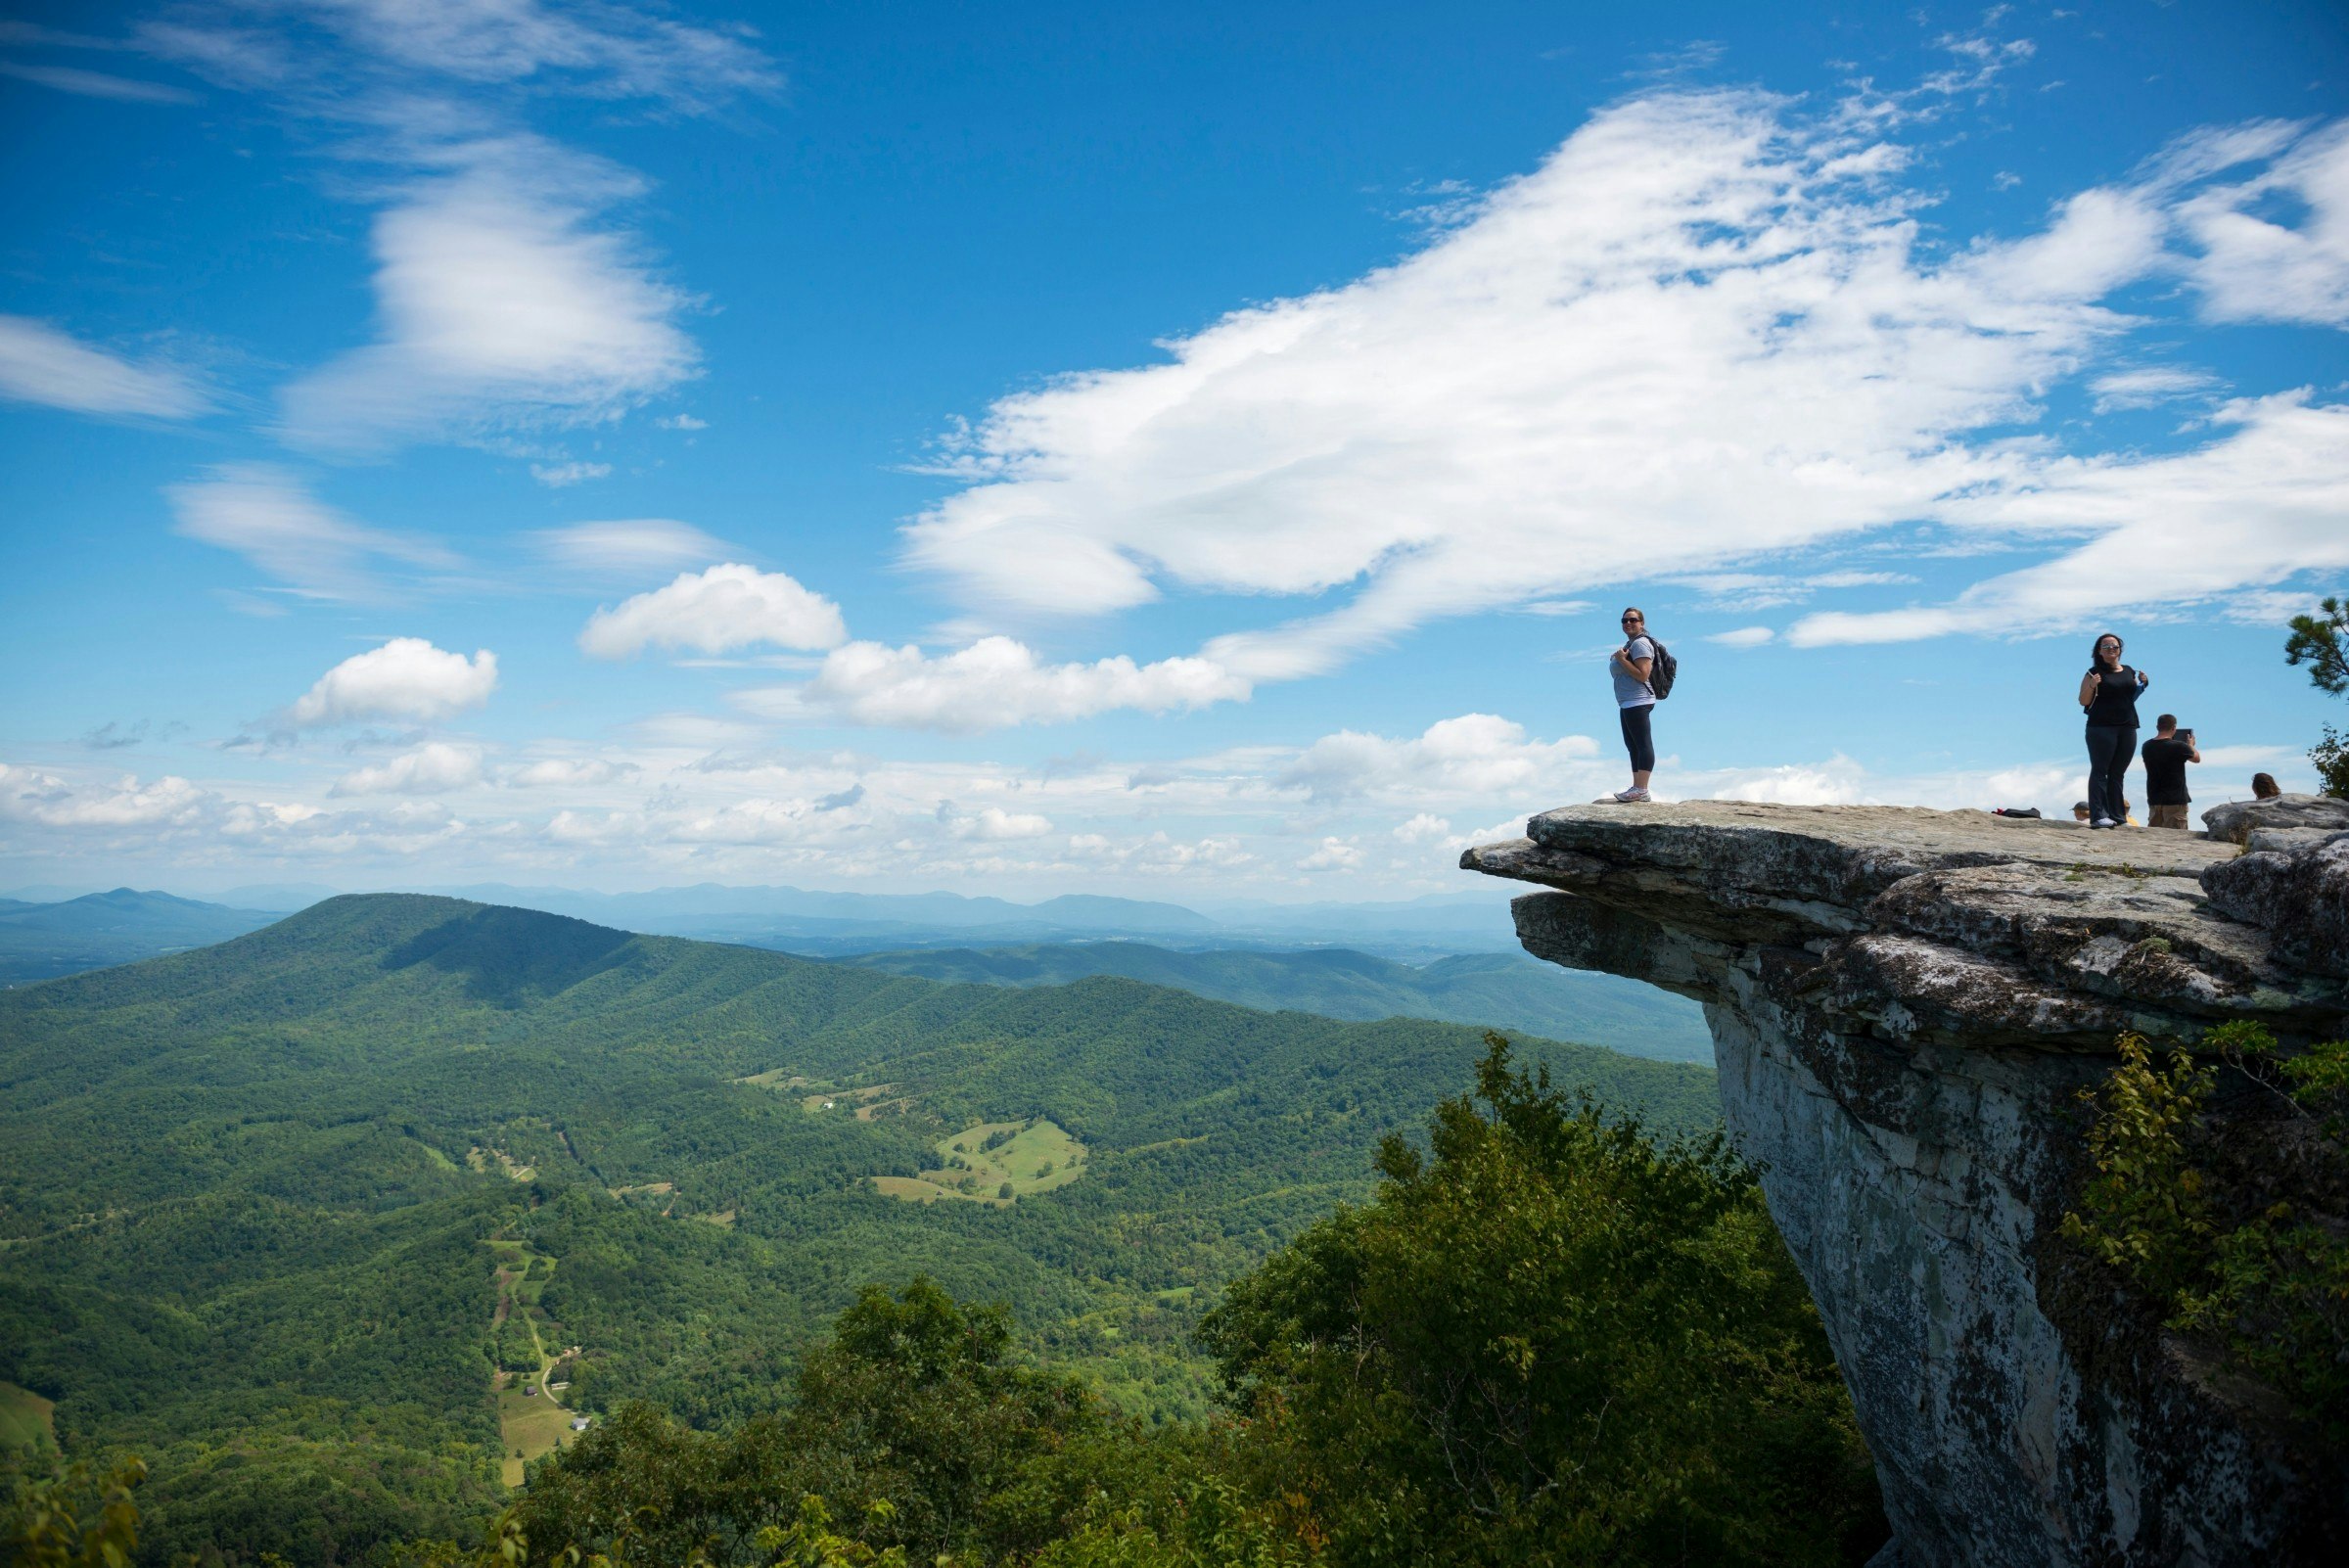 Hikers take in the view of the Appalachian Mountains from McAfee Knob on Catawba Mountain.